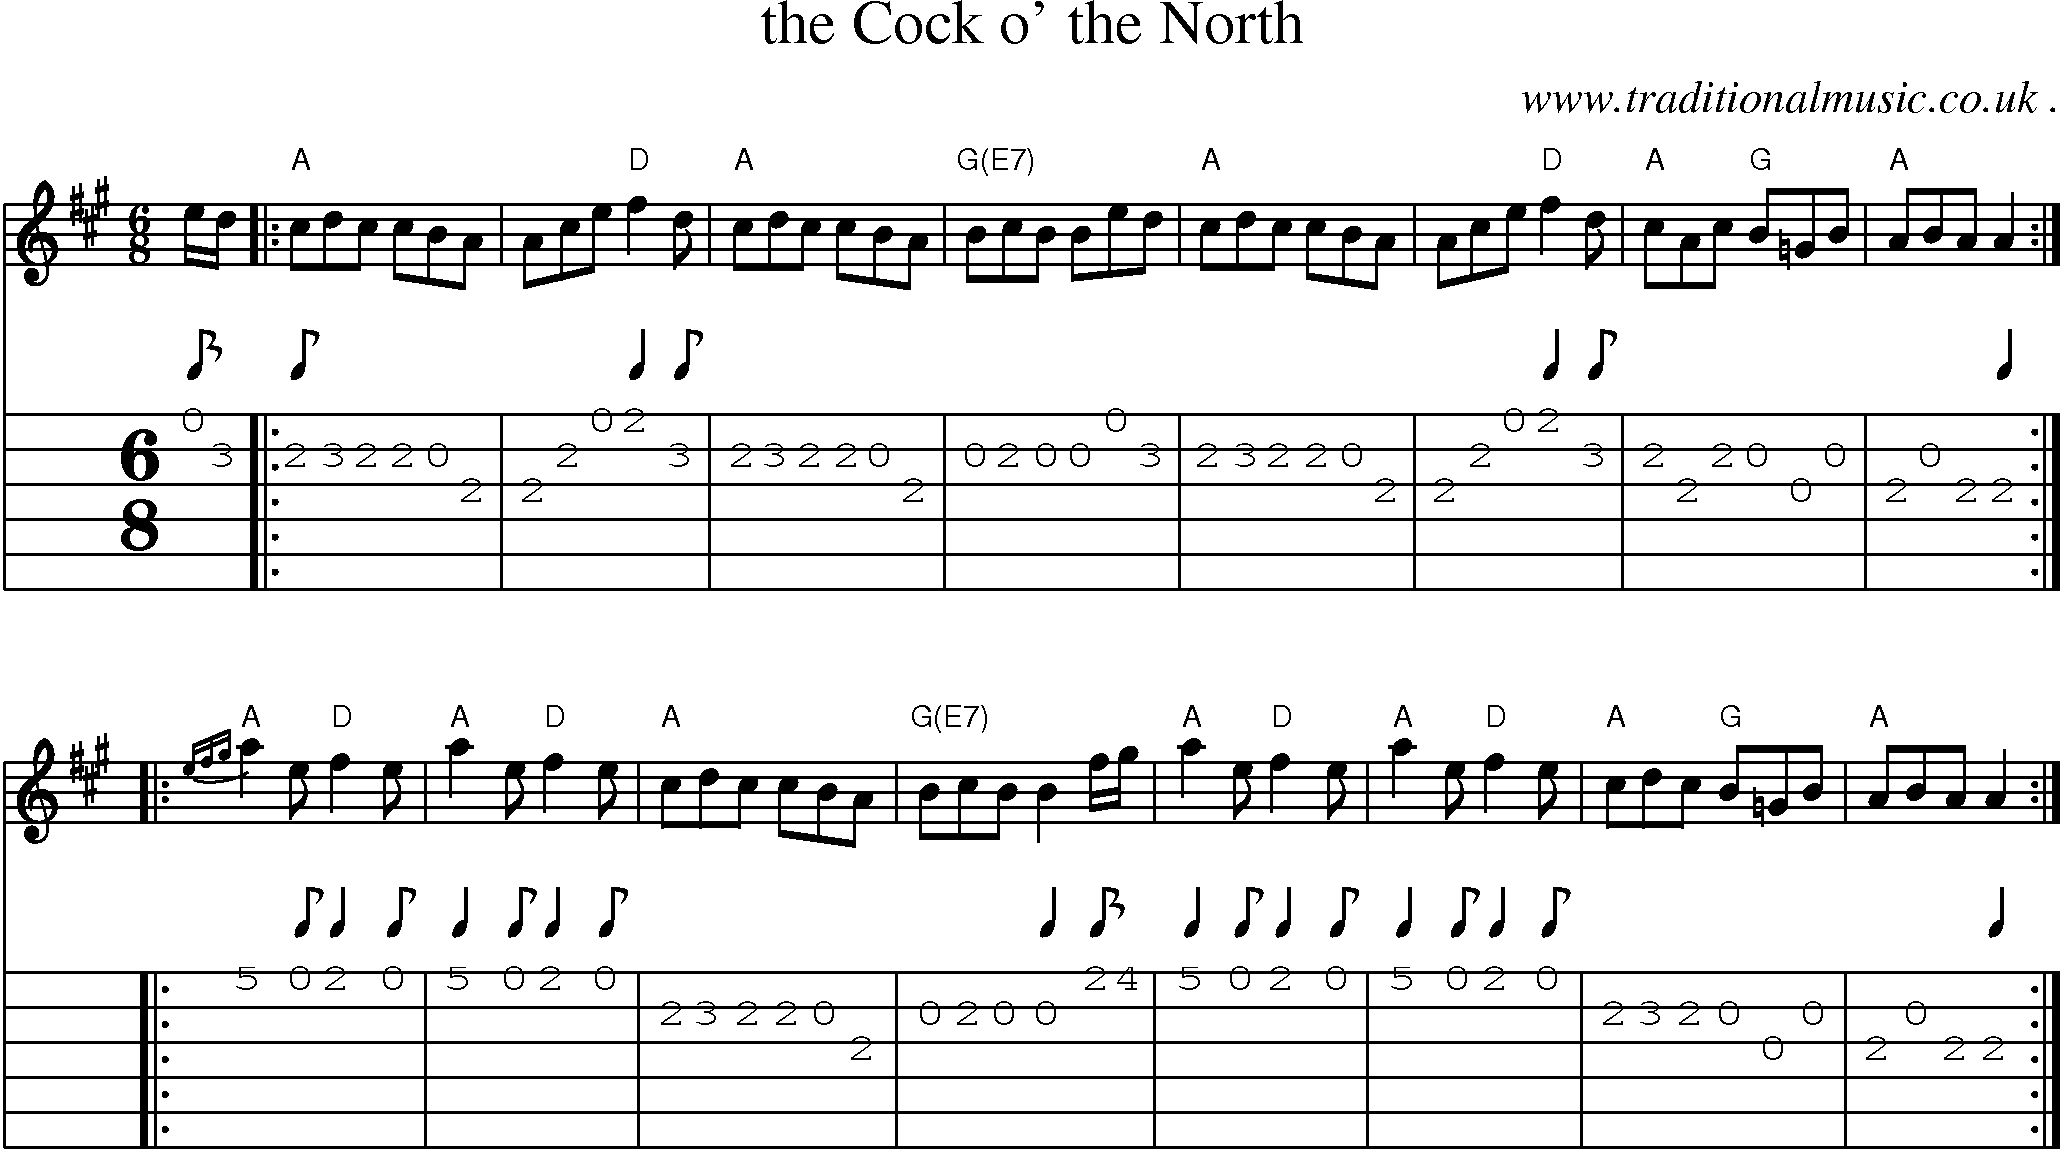 Sheet-music  score, Chords and Guitar Tabs for The Cock O The North